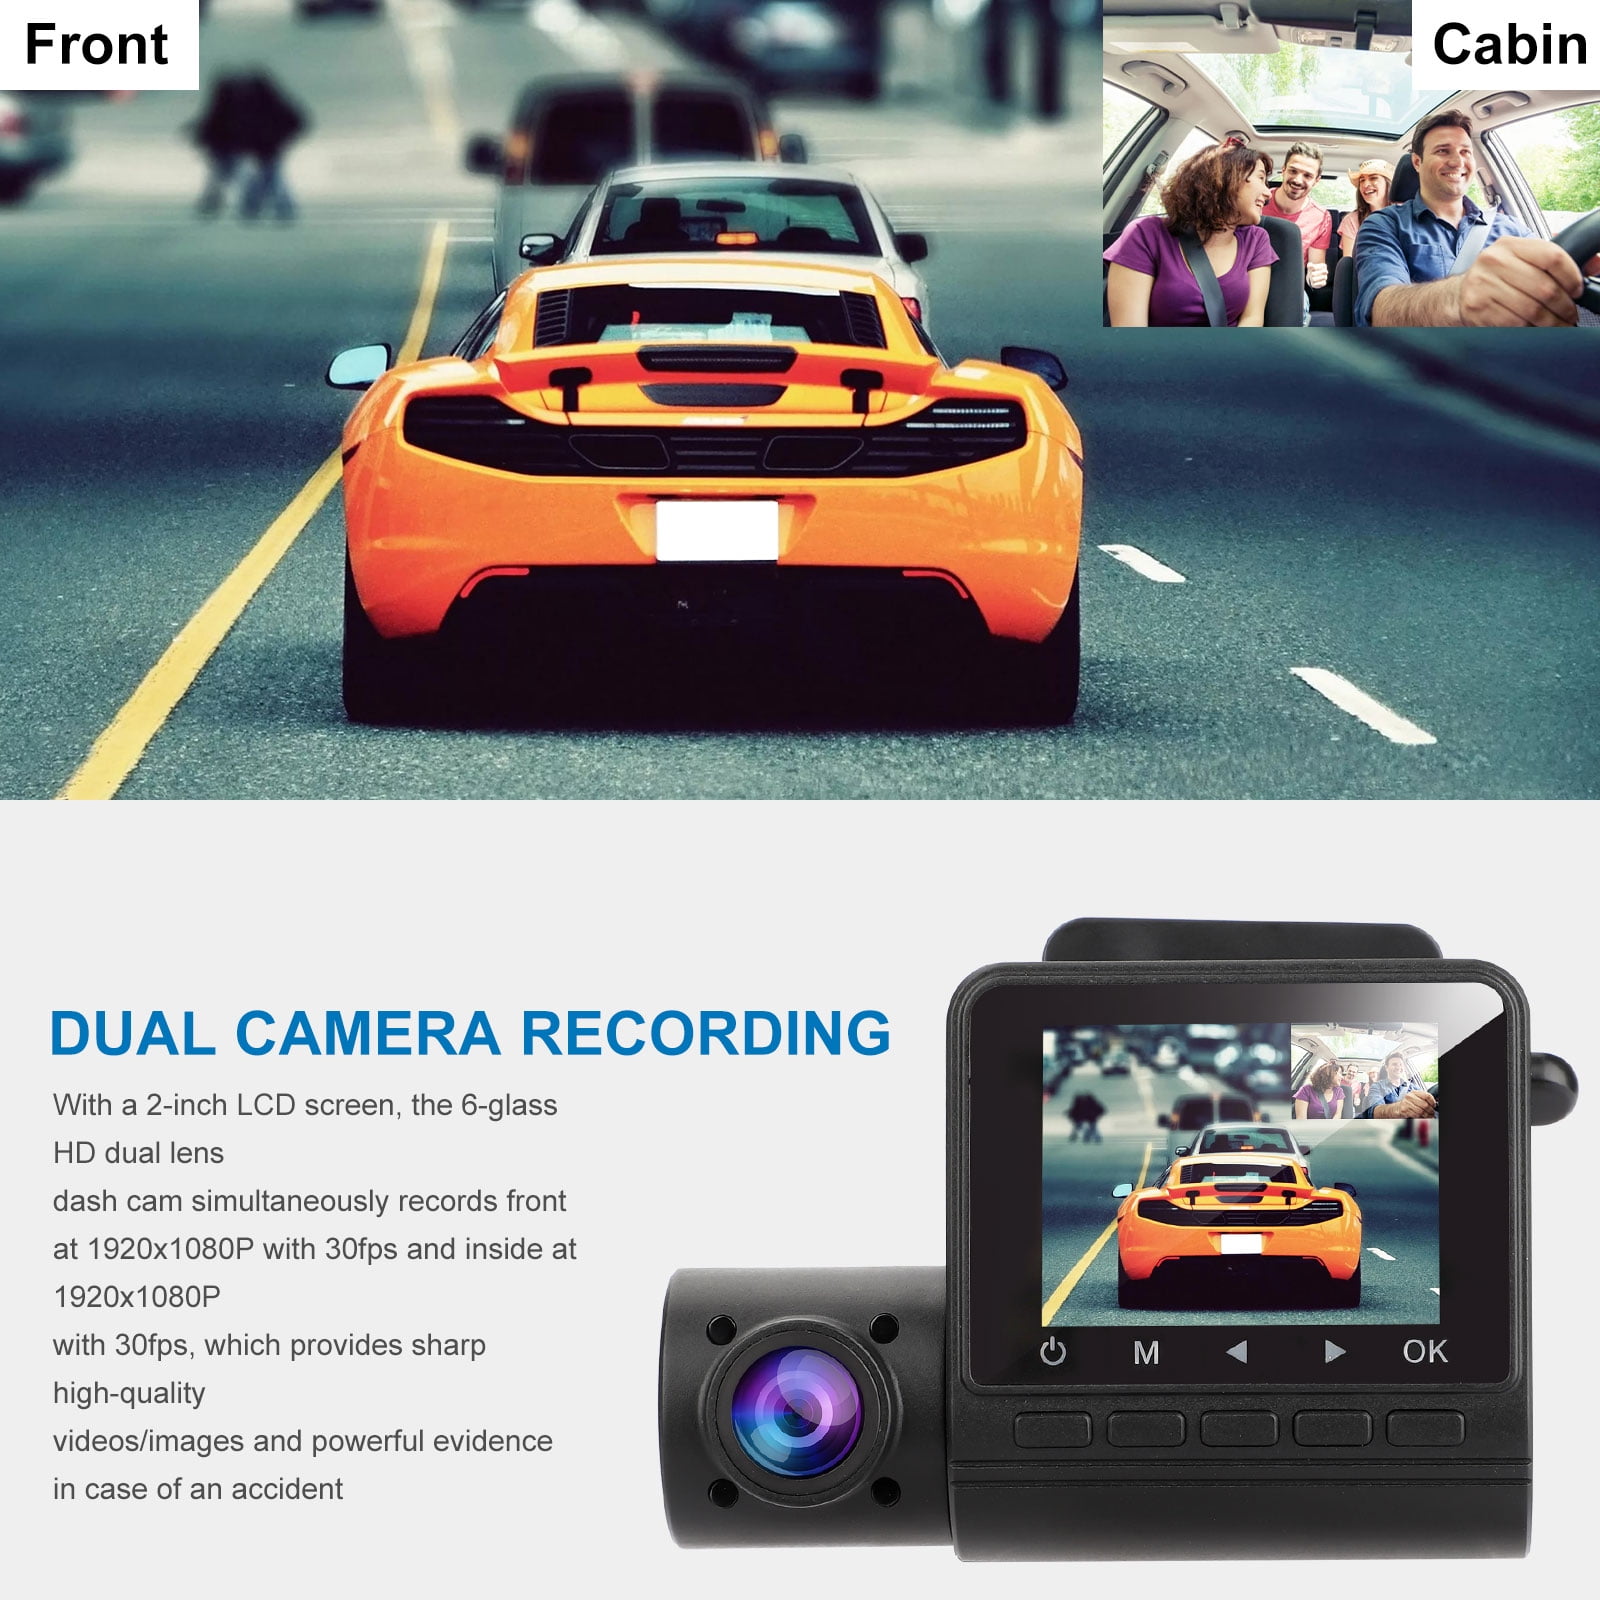 Caméra embarquée voiture dashcam full hd 1080p tactile grand angle recul  gris + sd 8go yonis YONIS Pas Cher 